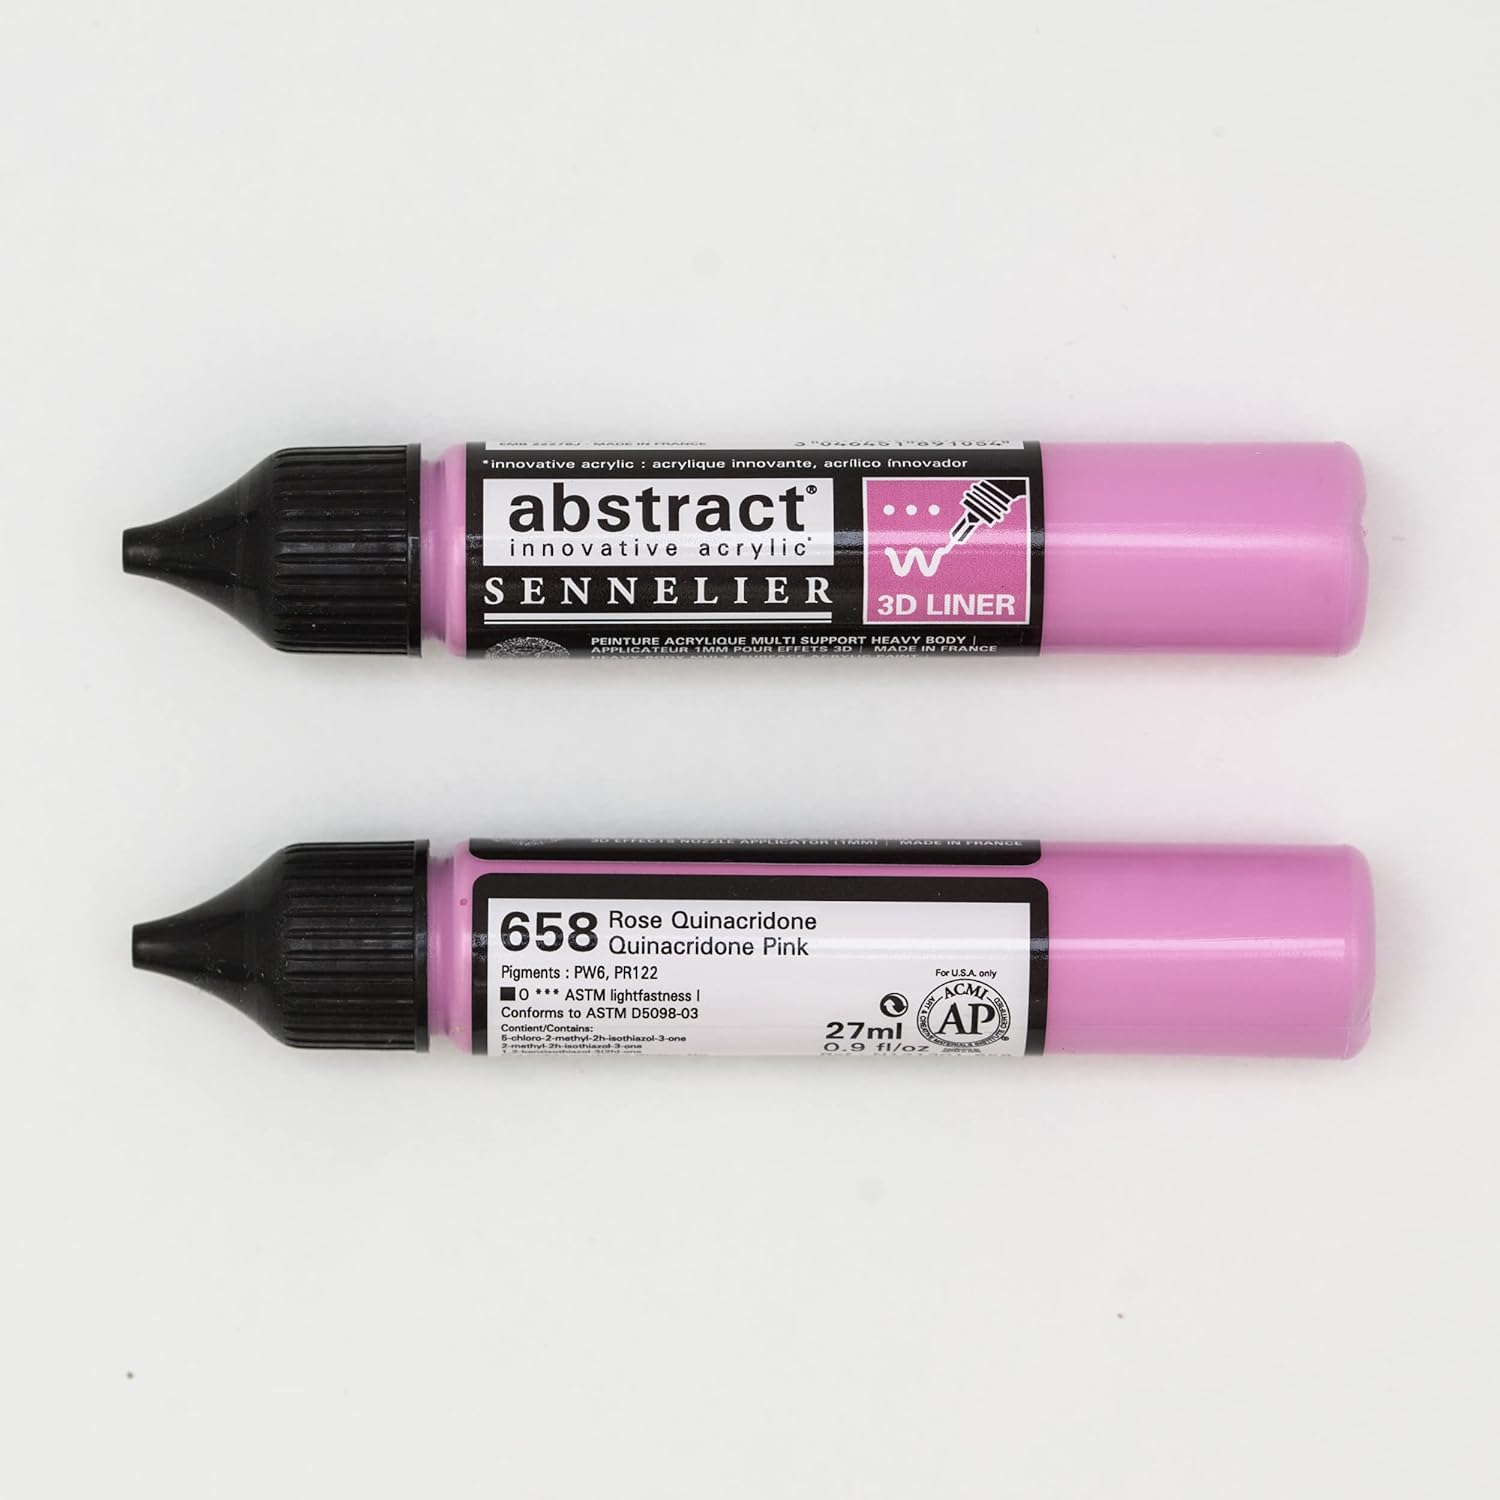 Sennelier Abstract Acrylic Liner, 27ml, Quinacridone Pink